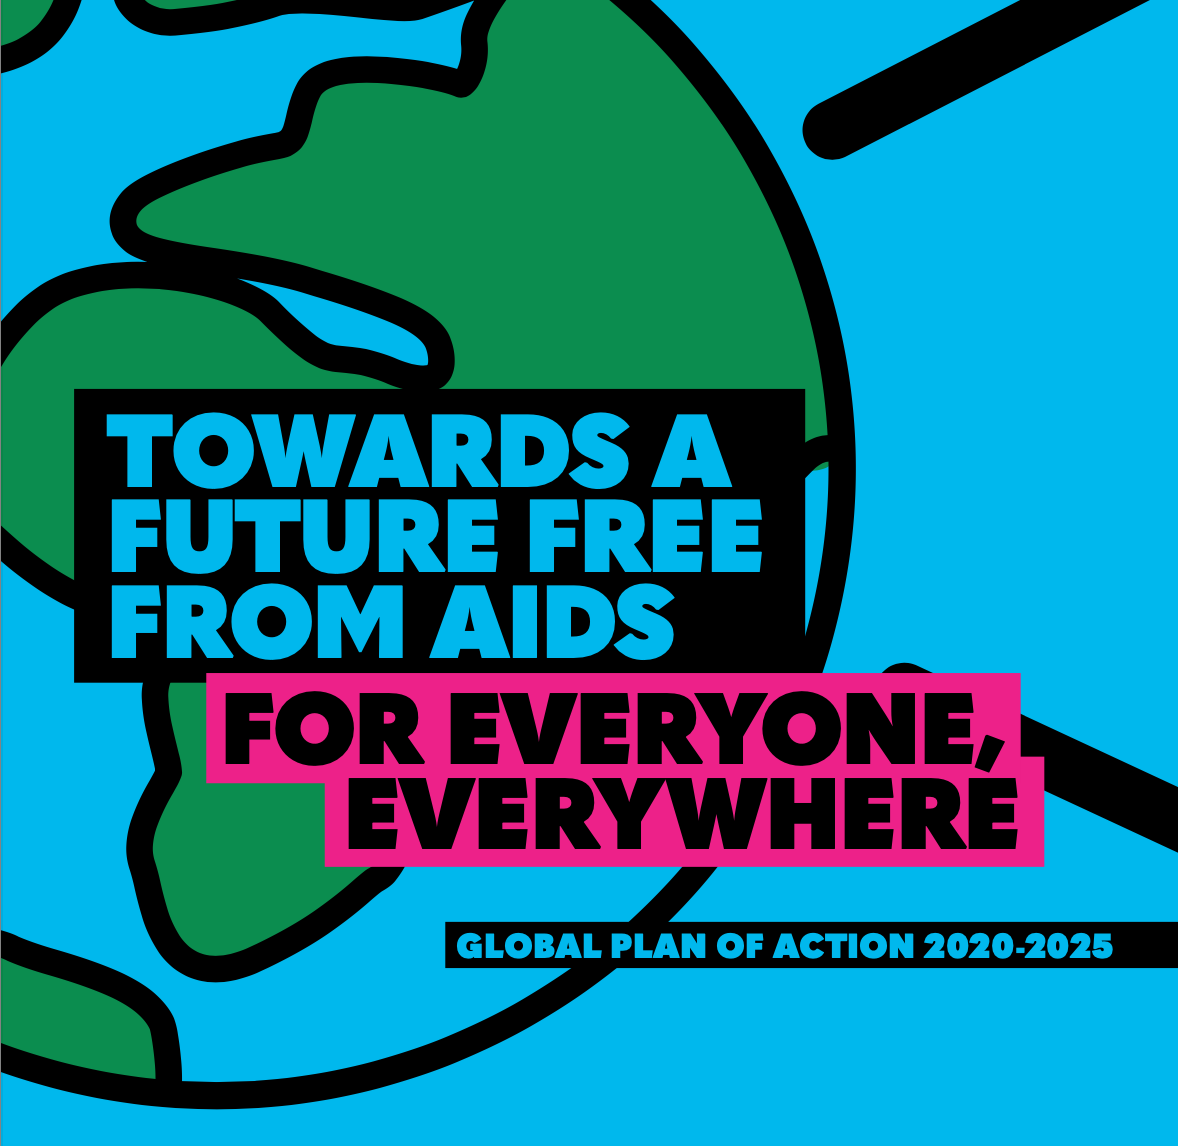 Towards a Future Free From AIDs for Everyone, Everywhere